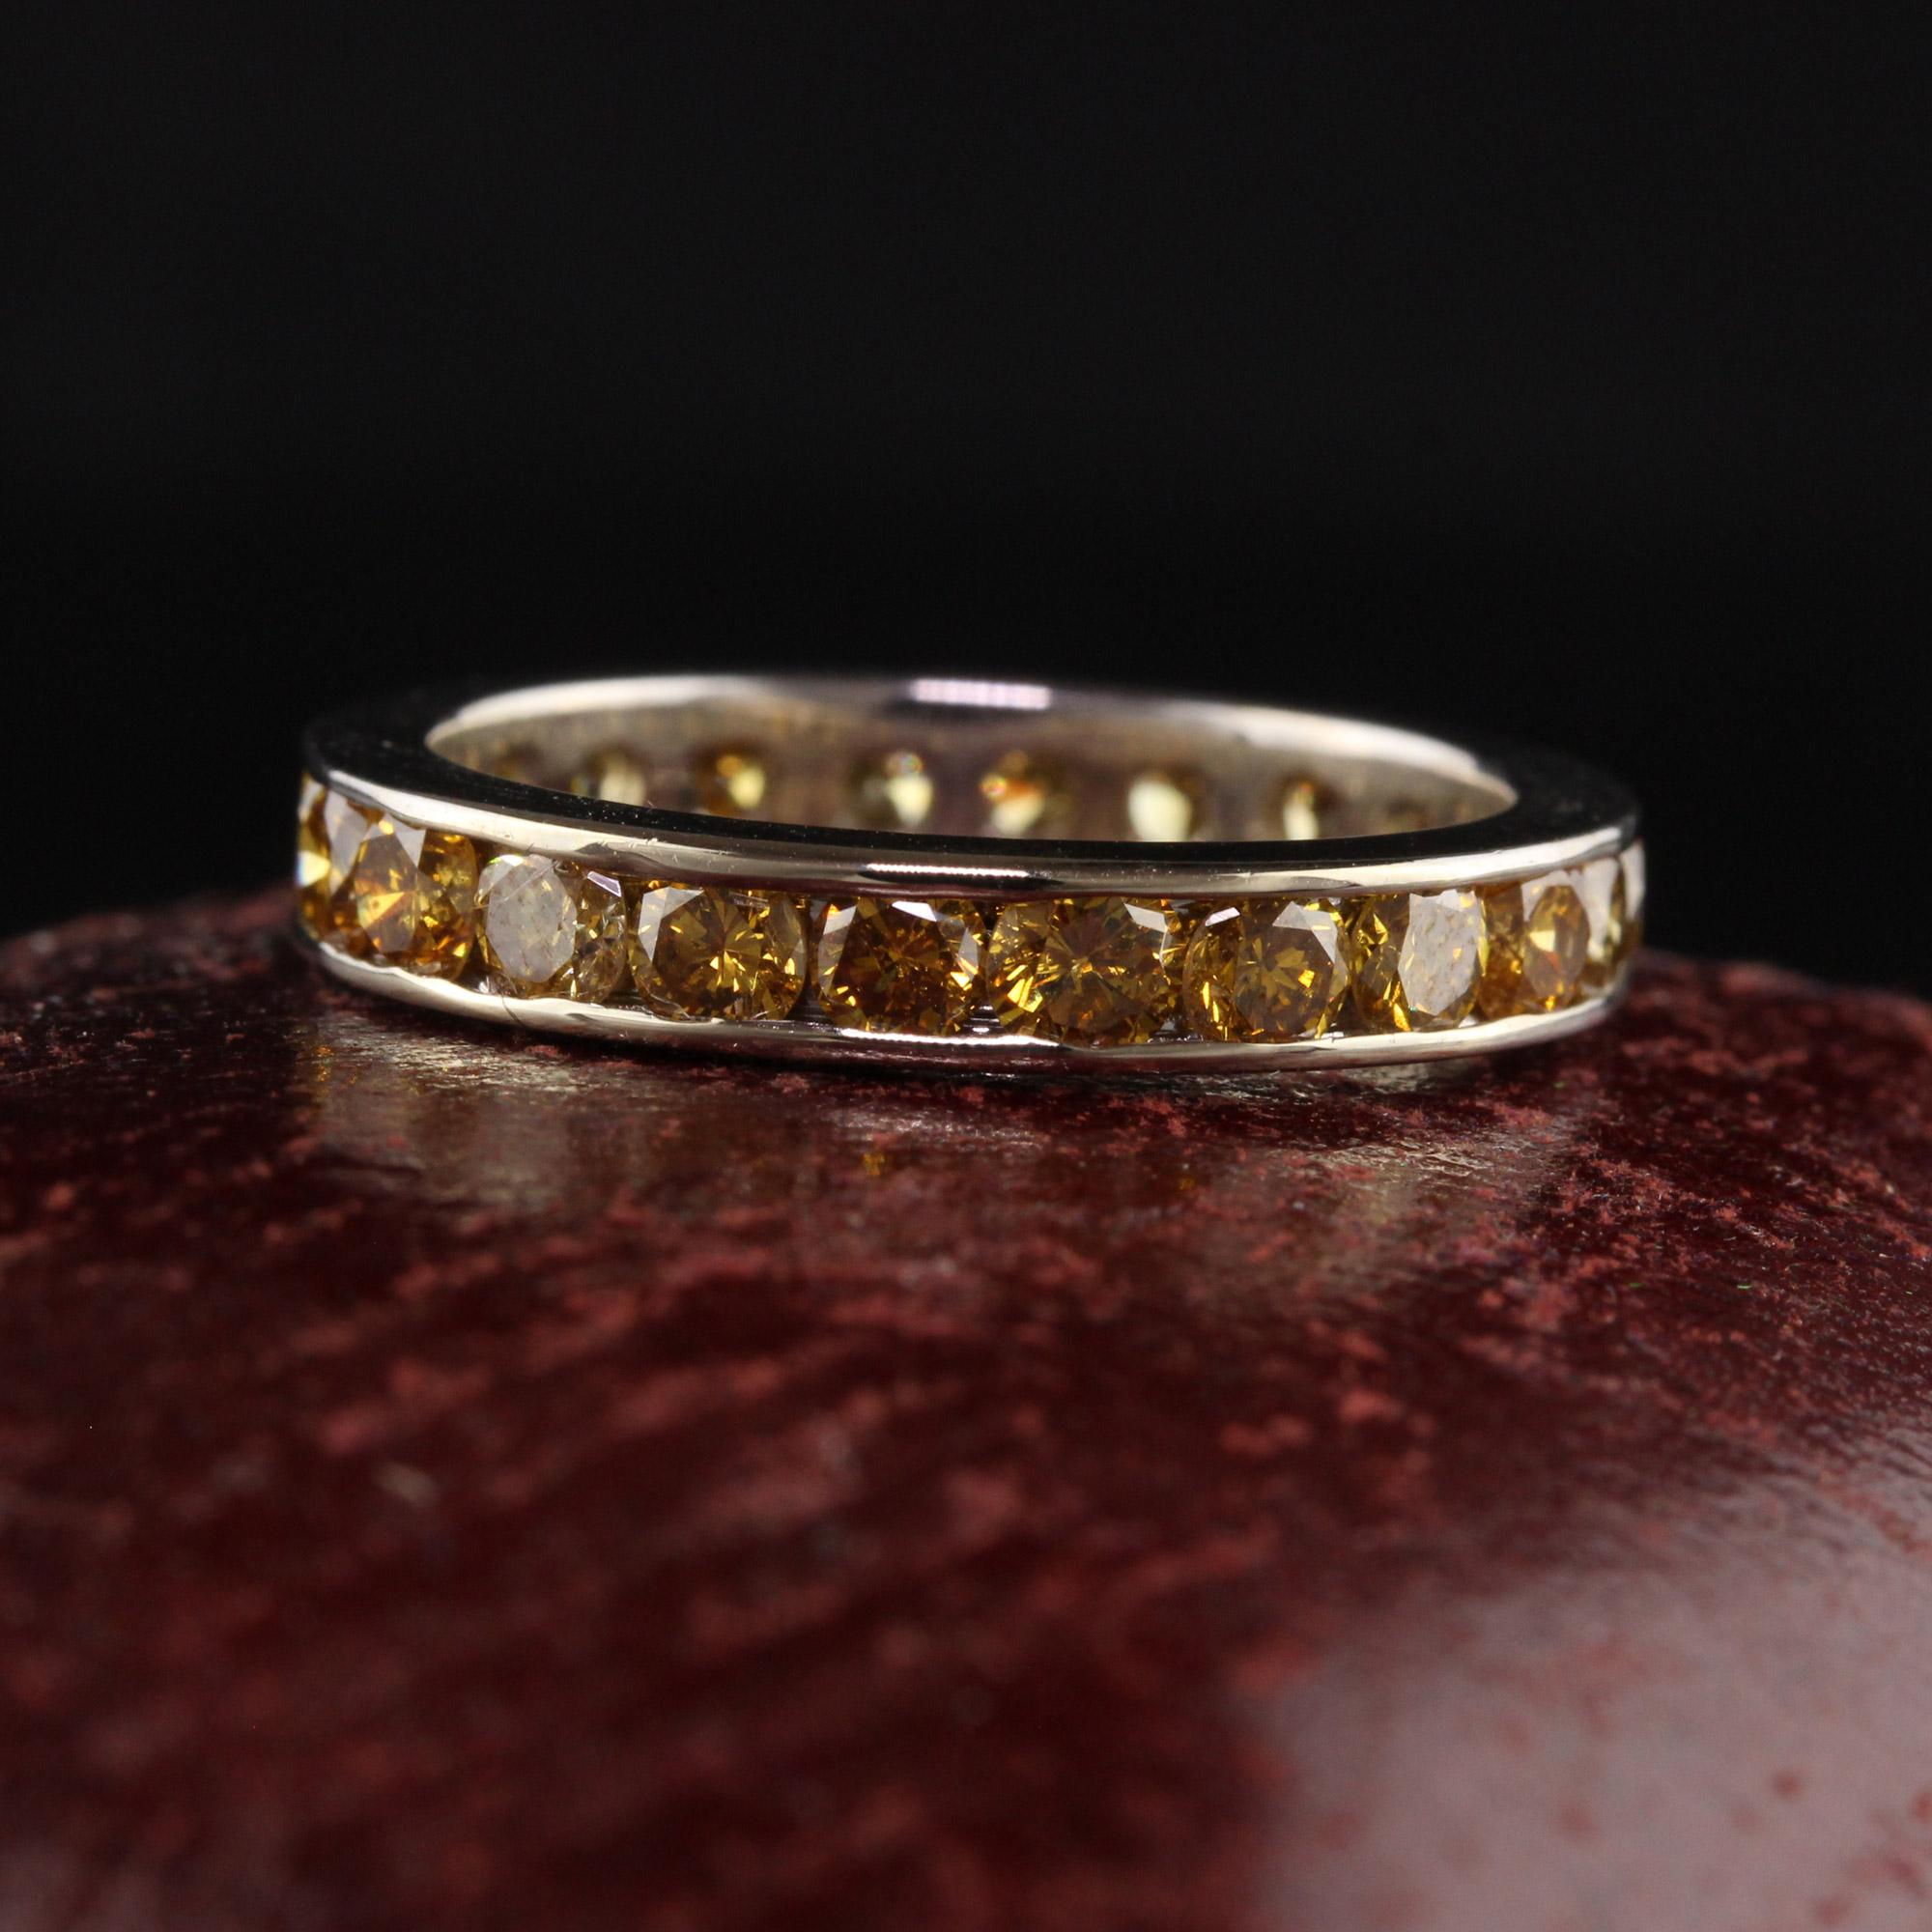 Beautiful Vintage Estate 14K White Gold Round Yellow Sapphire Eternity Band. This beautiful band is crafted in 14k white gold. There are natural round yellow sapphires going around the entire ring and it is in great condition.

Item #R1381

Metal: